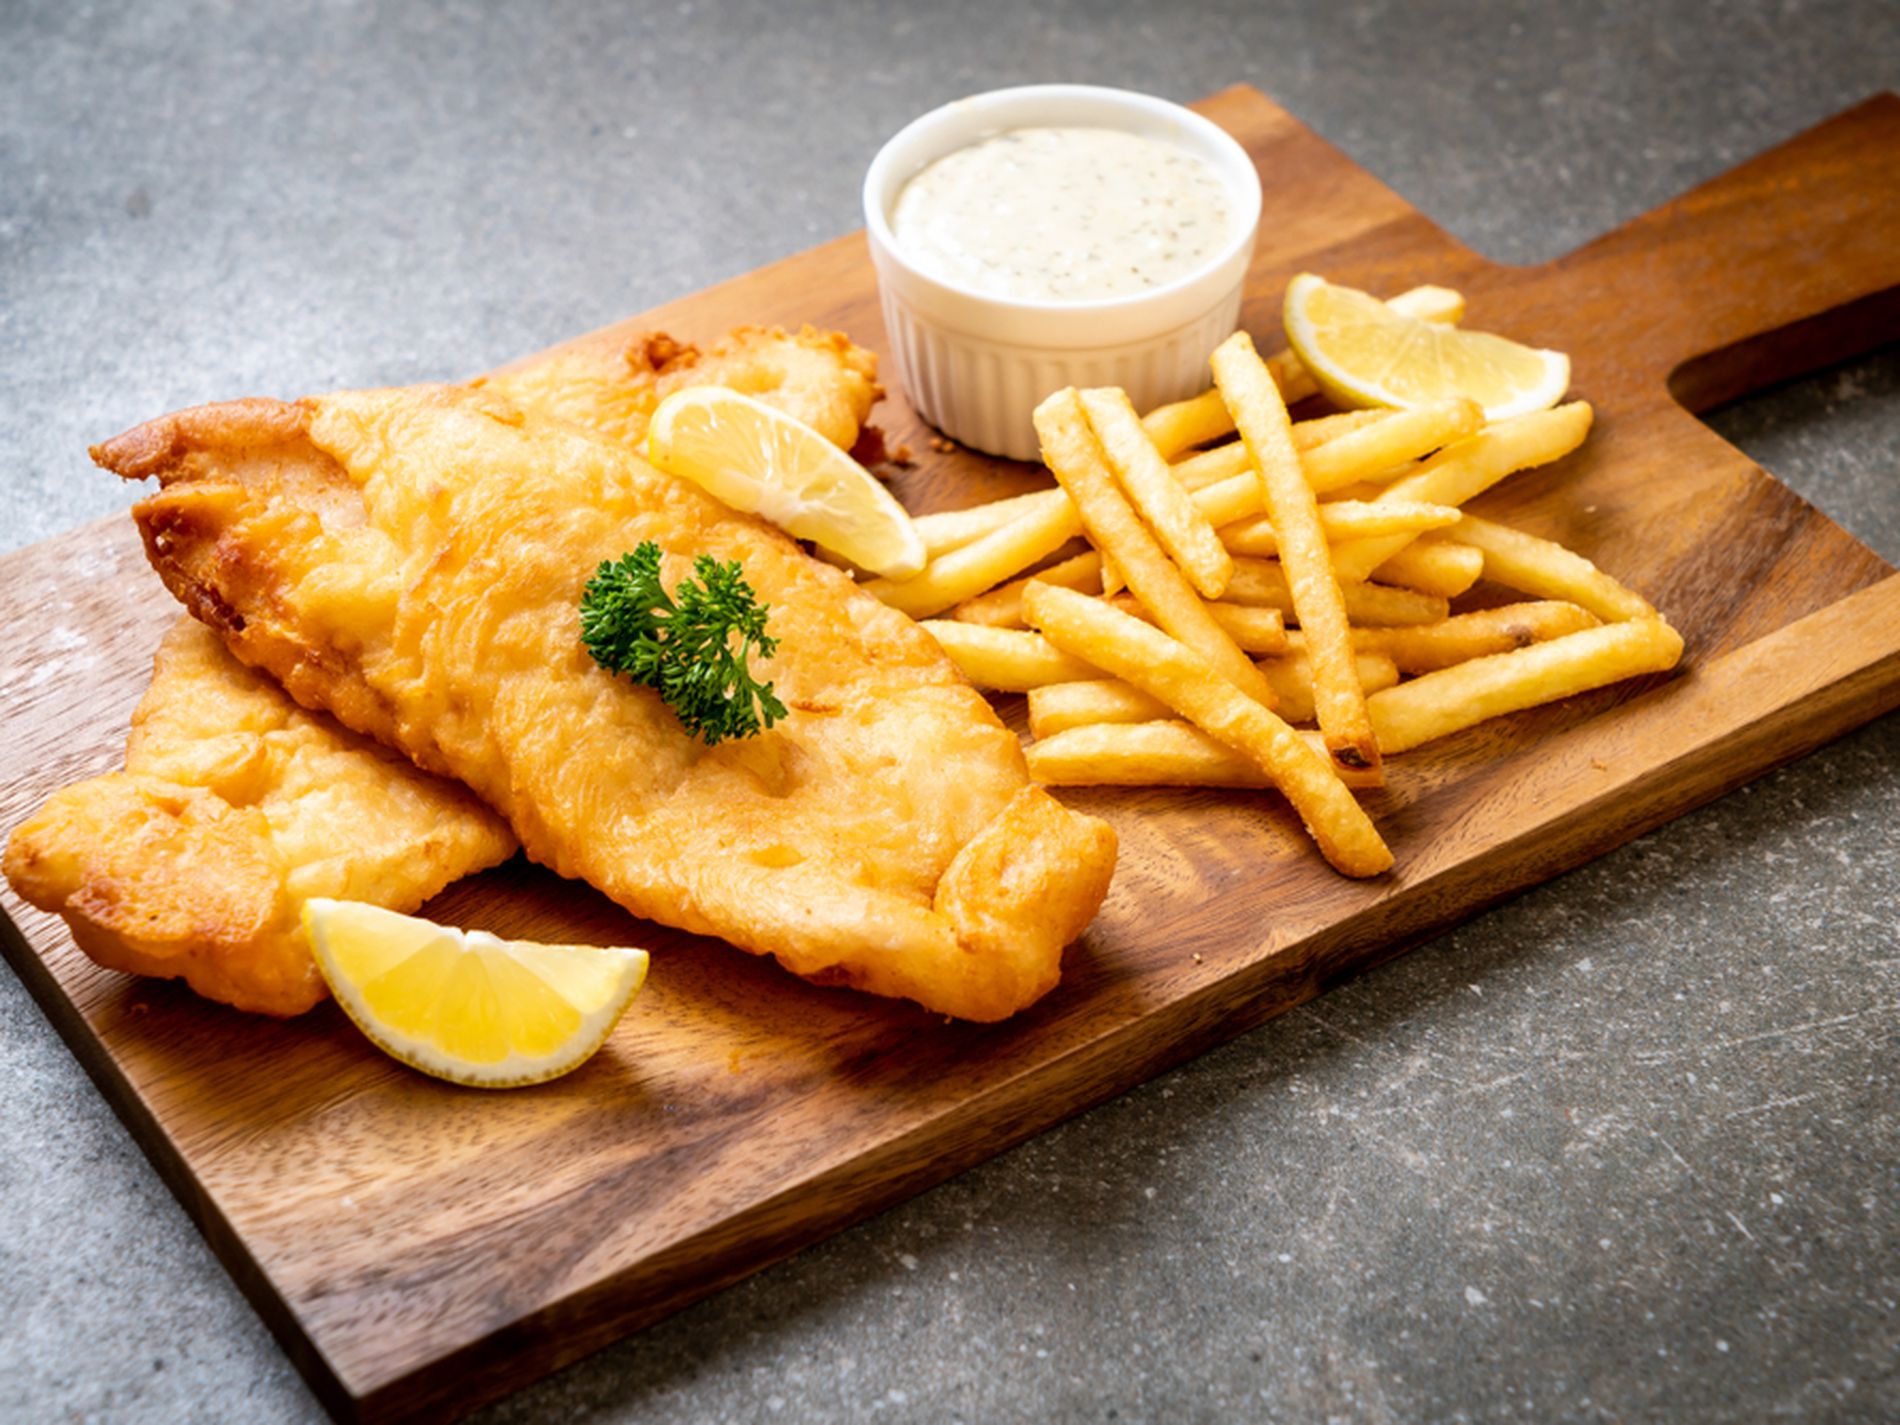 Sunbury Fish and Chips and Takeaway Business for Sale